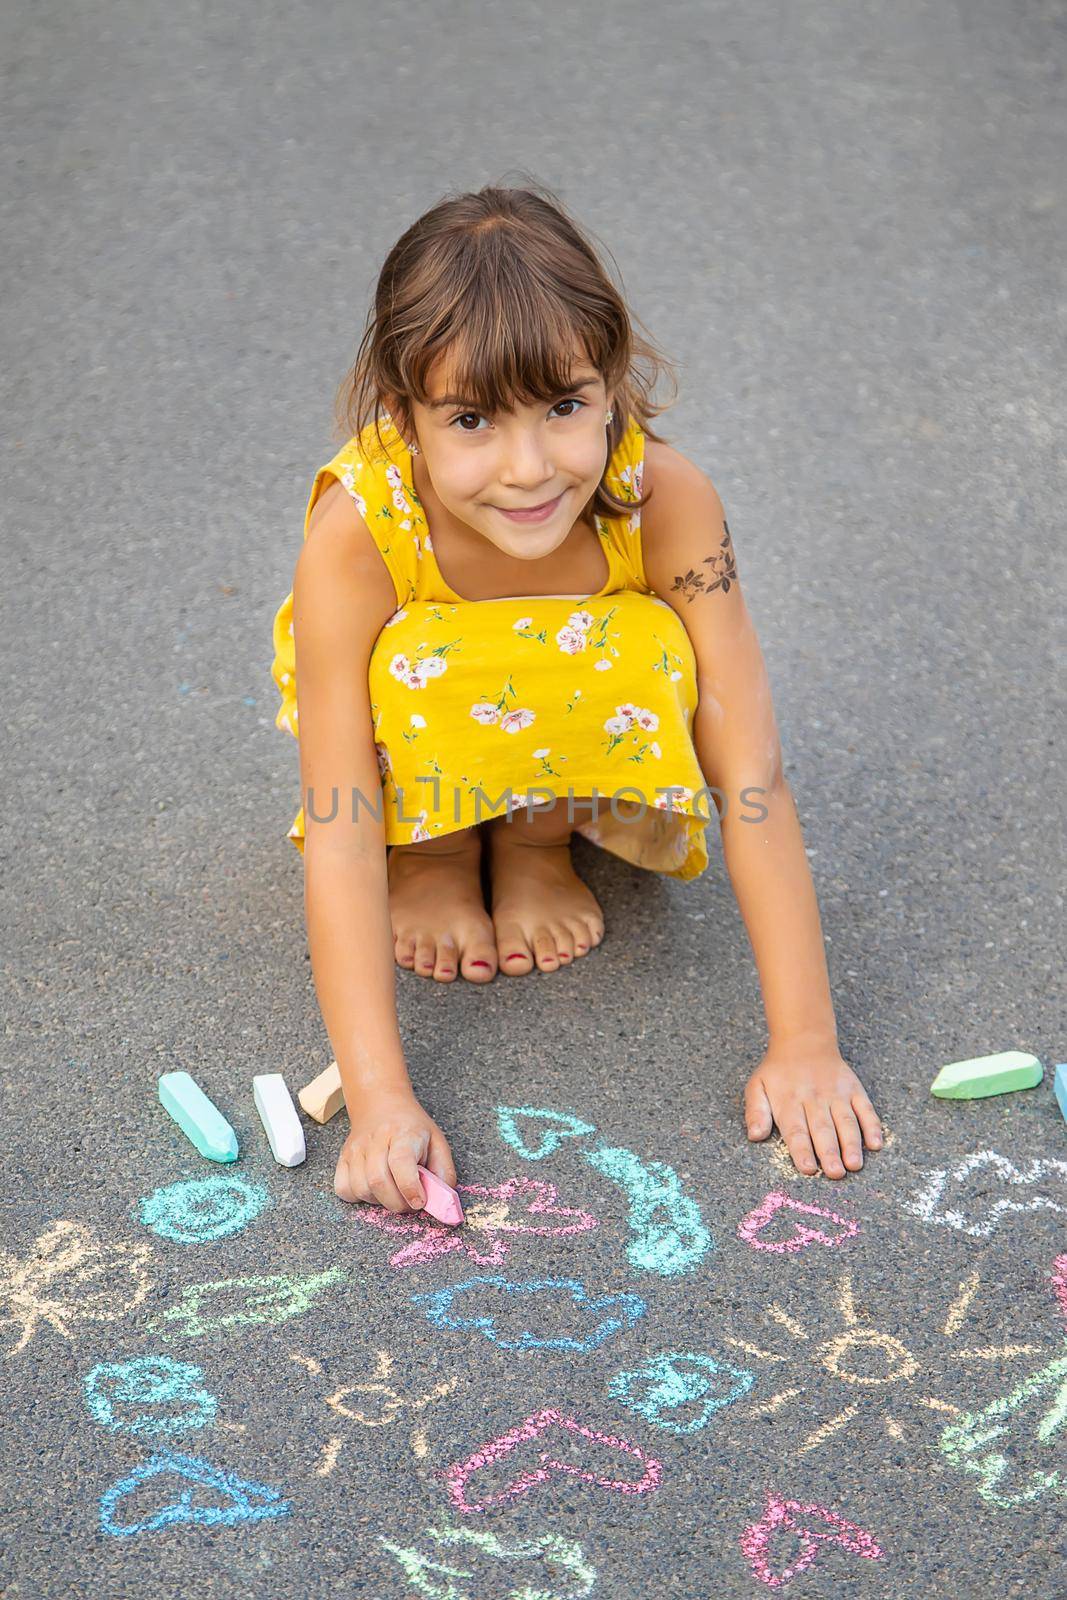 The child draws on the asphalt with chalk. Selective focus. Kid.